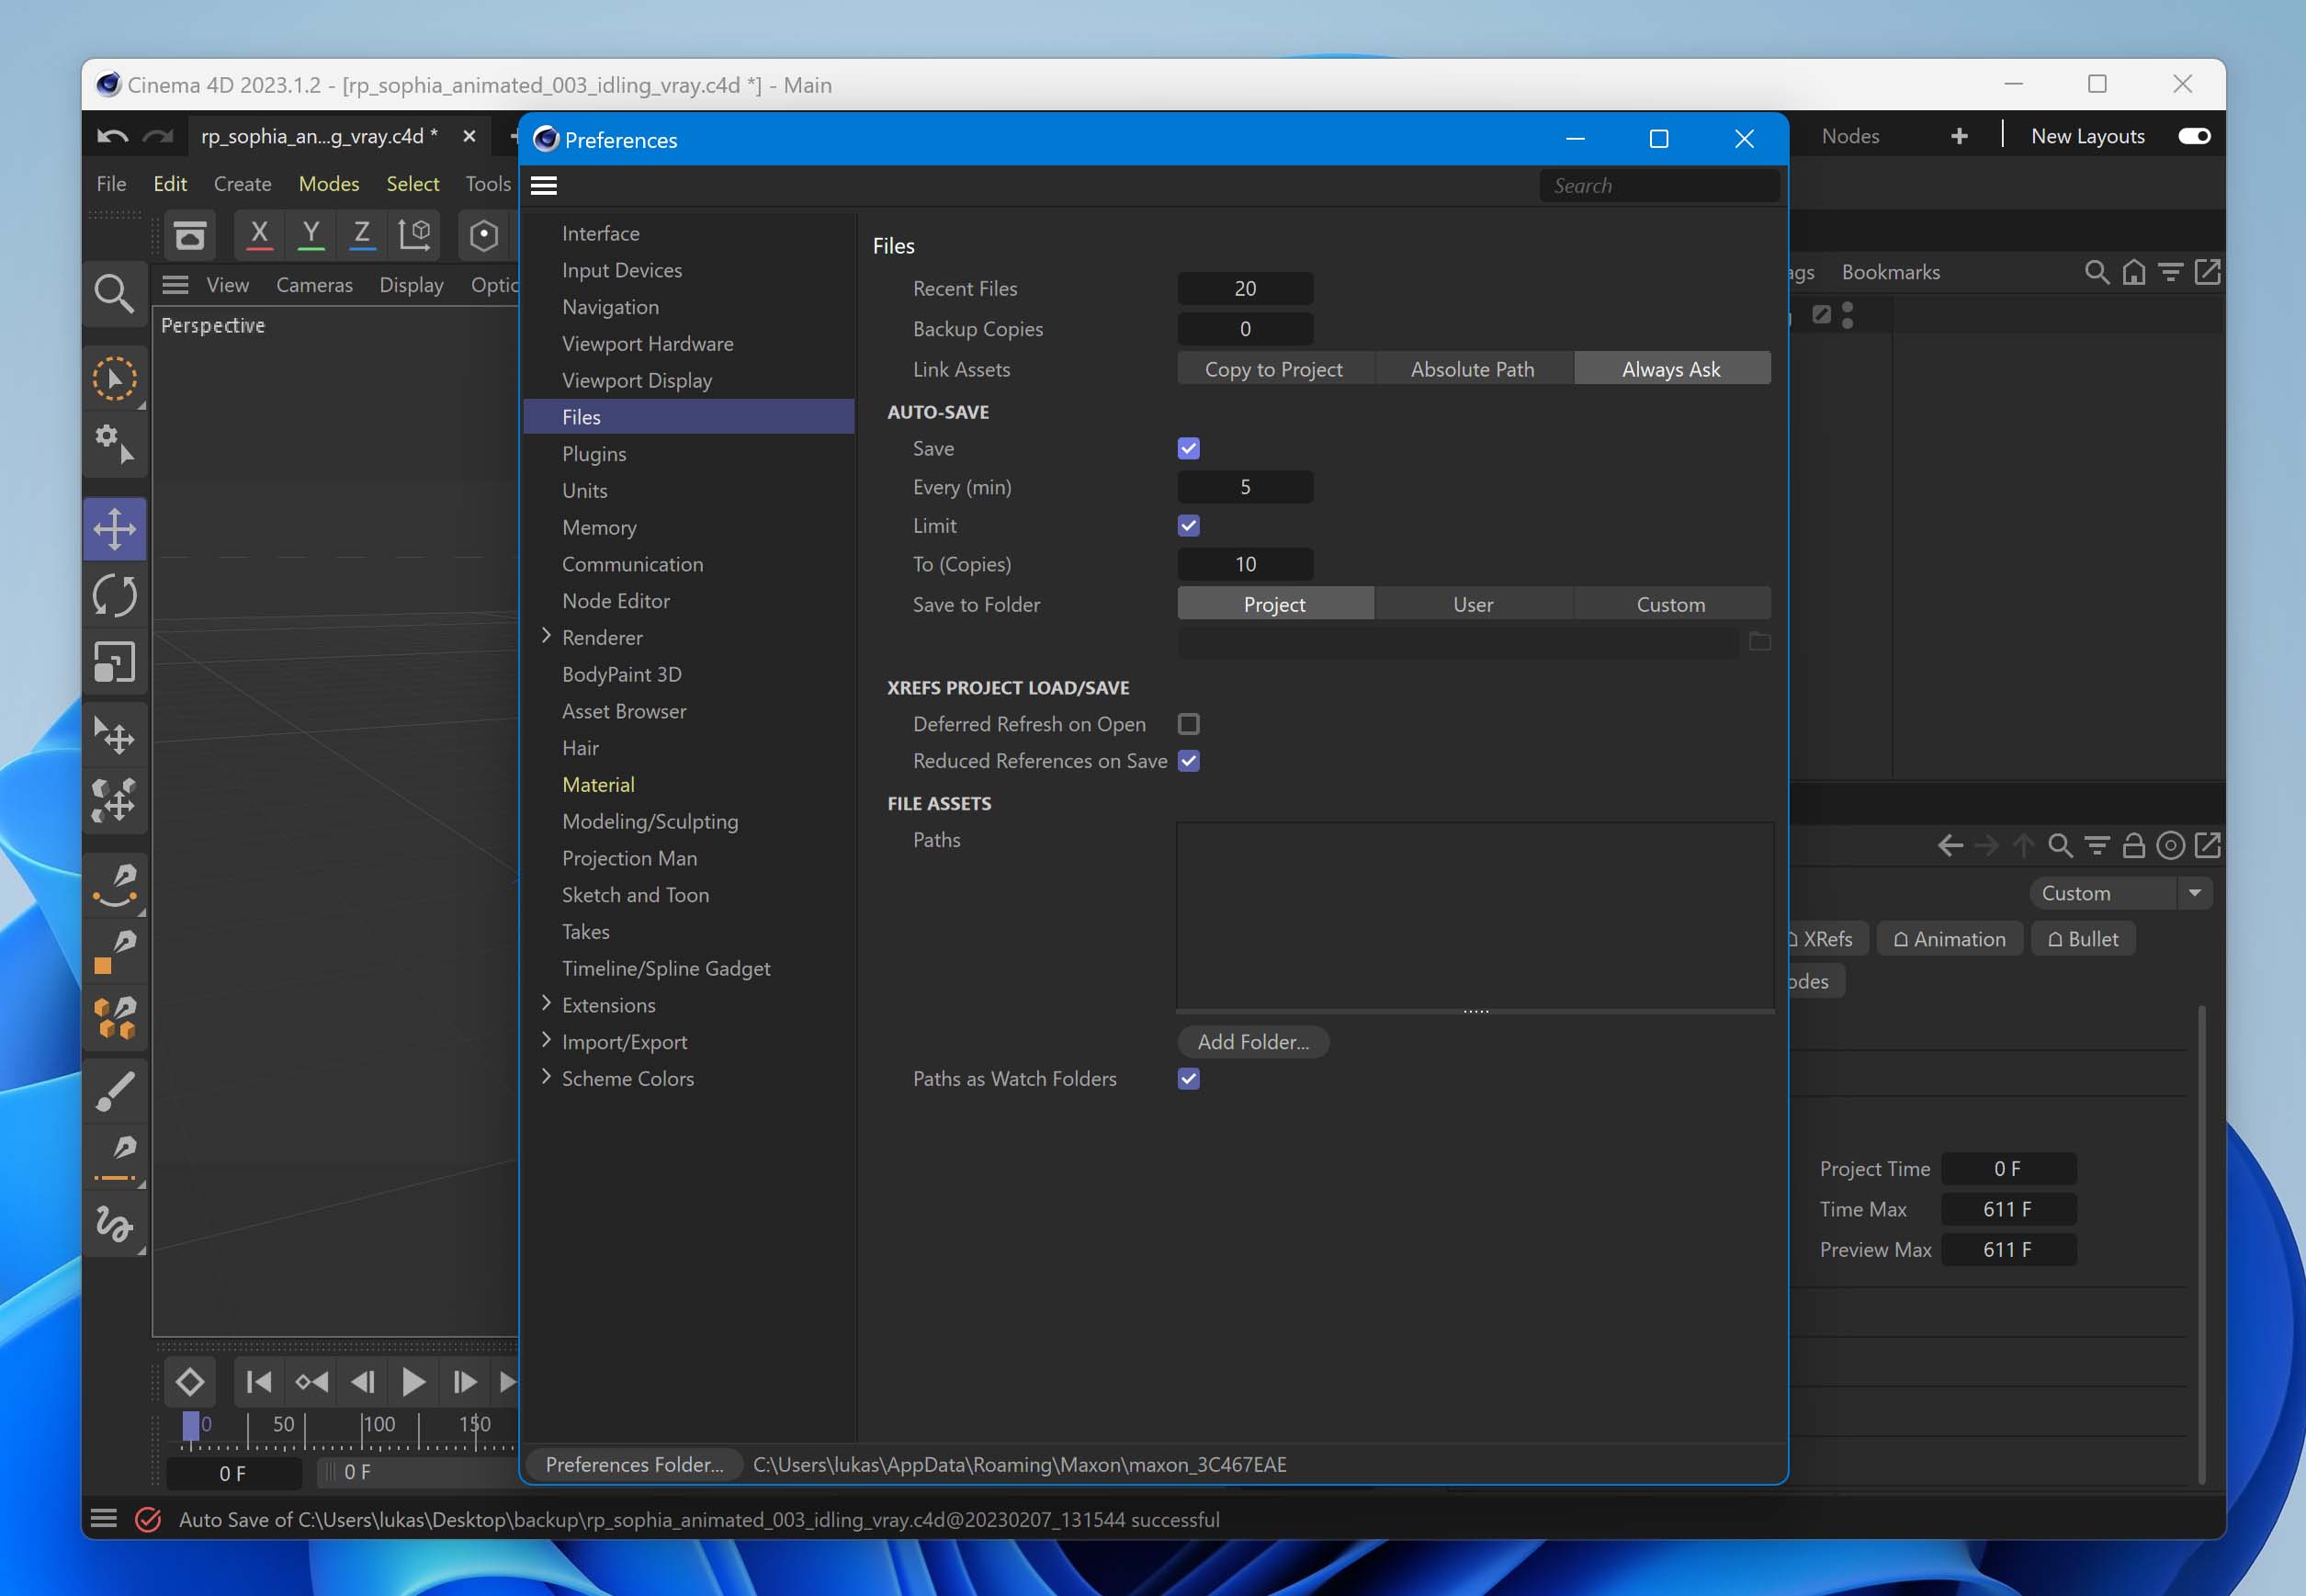 Autosave feature in cinema 4D.